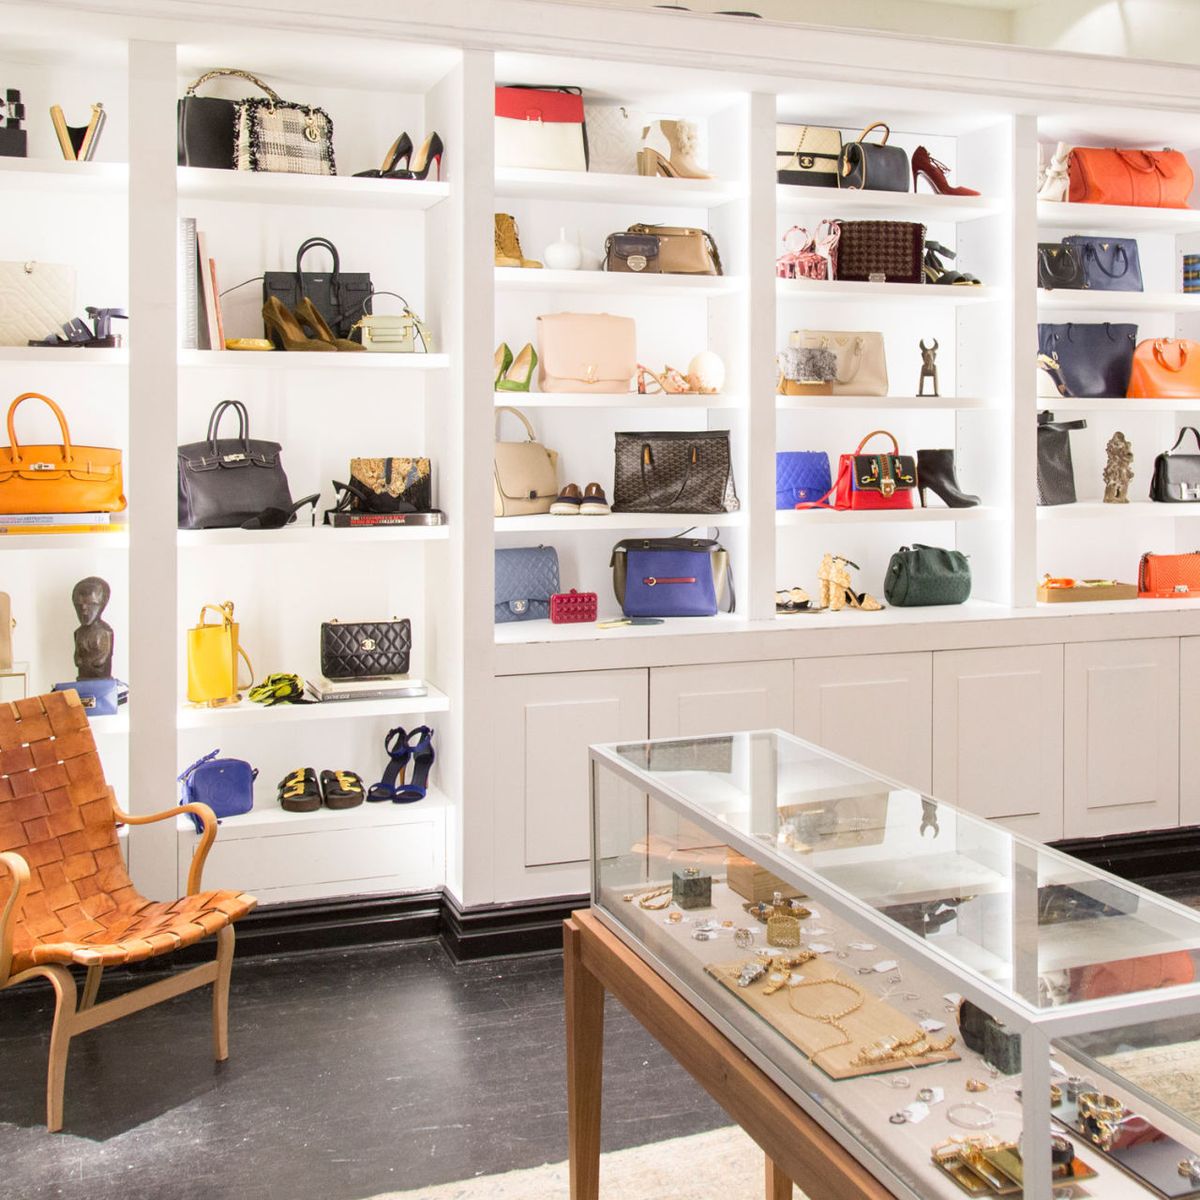 Store Directory - Luxury Shopping in NYC